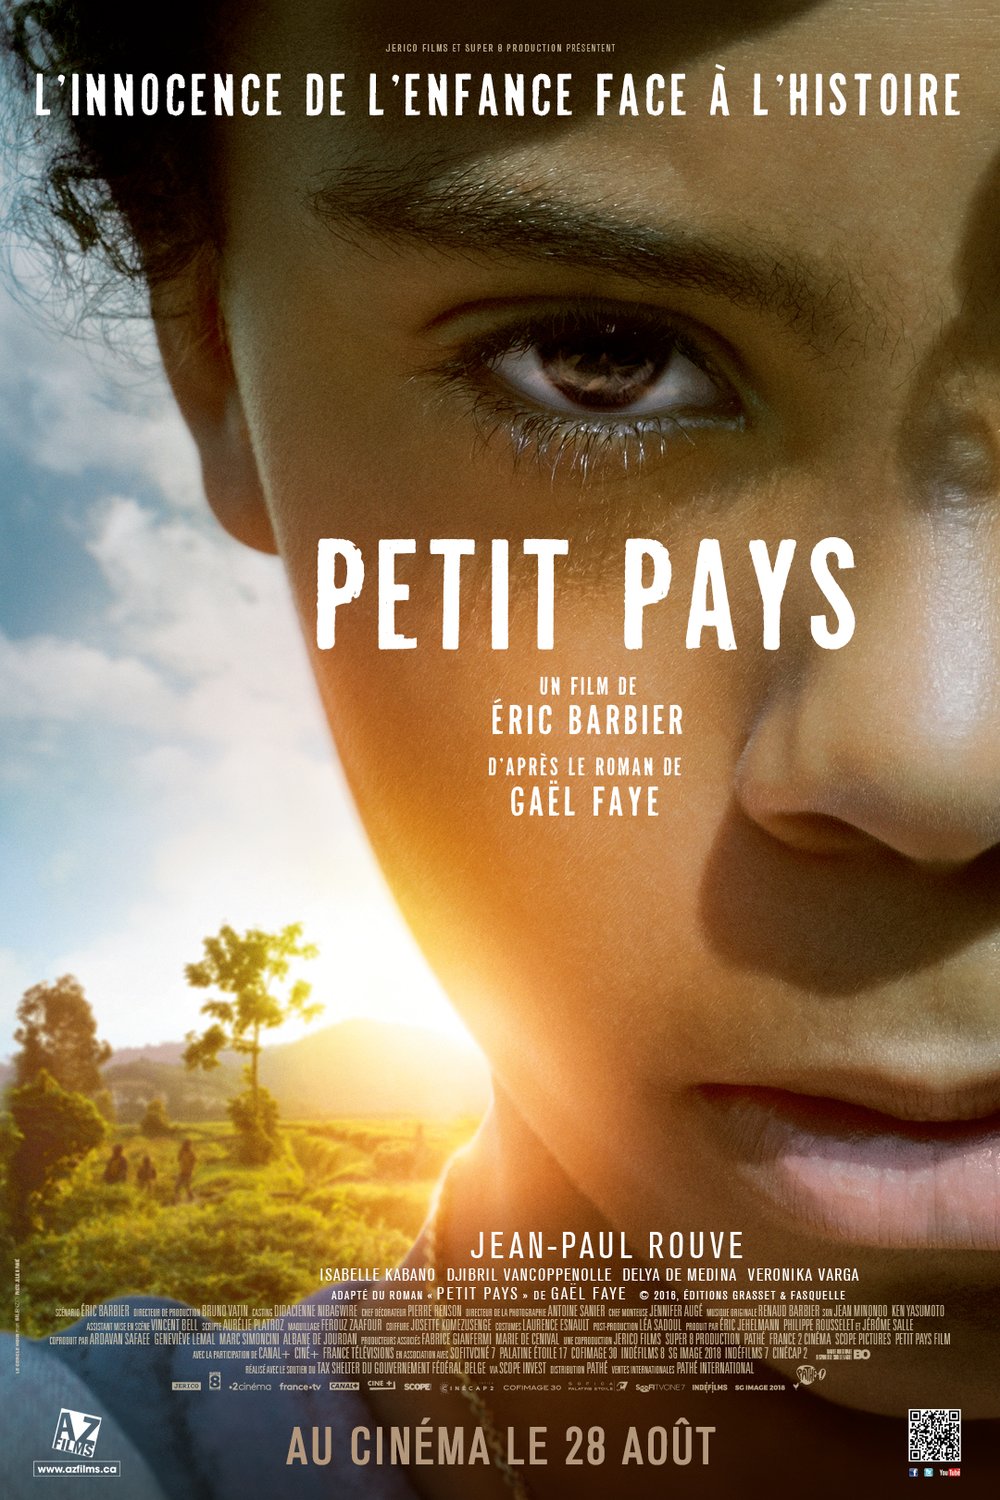 Poster of the movie Petit pays